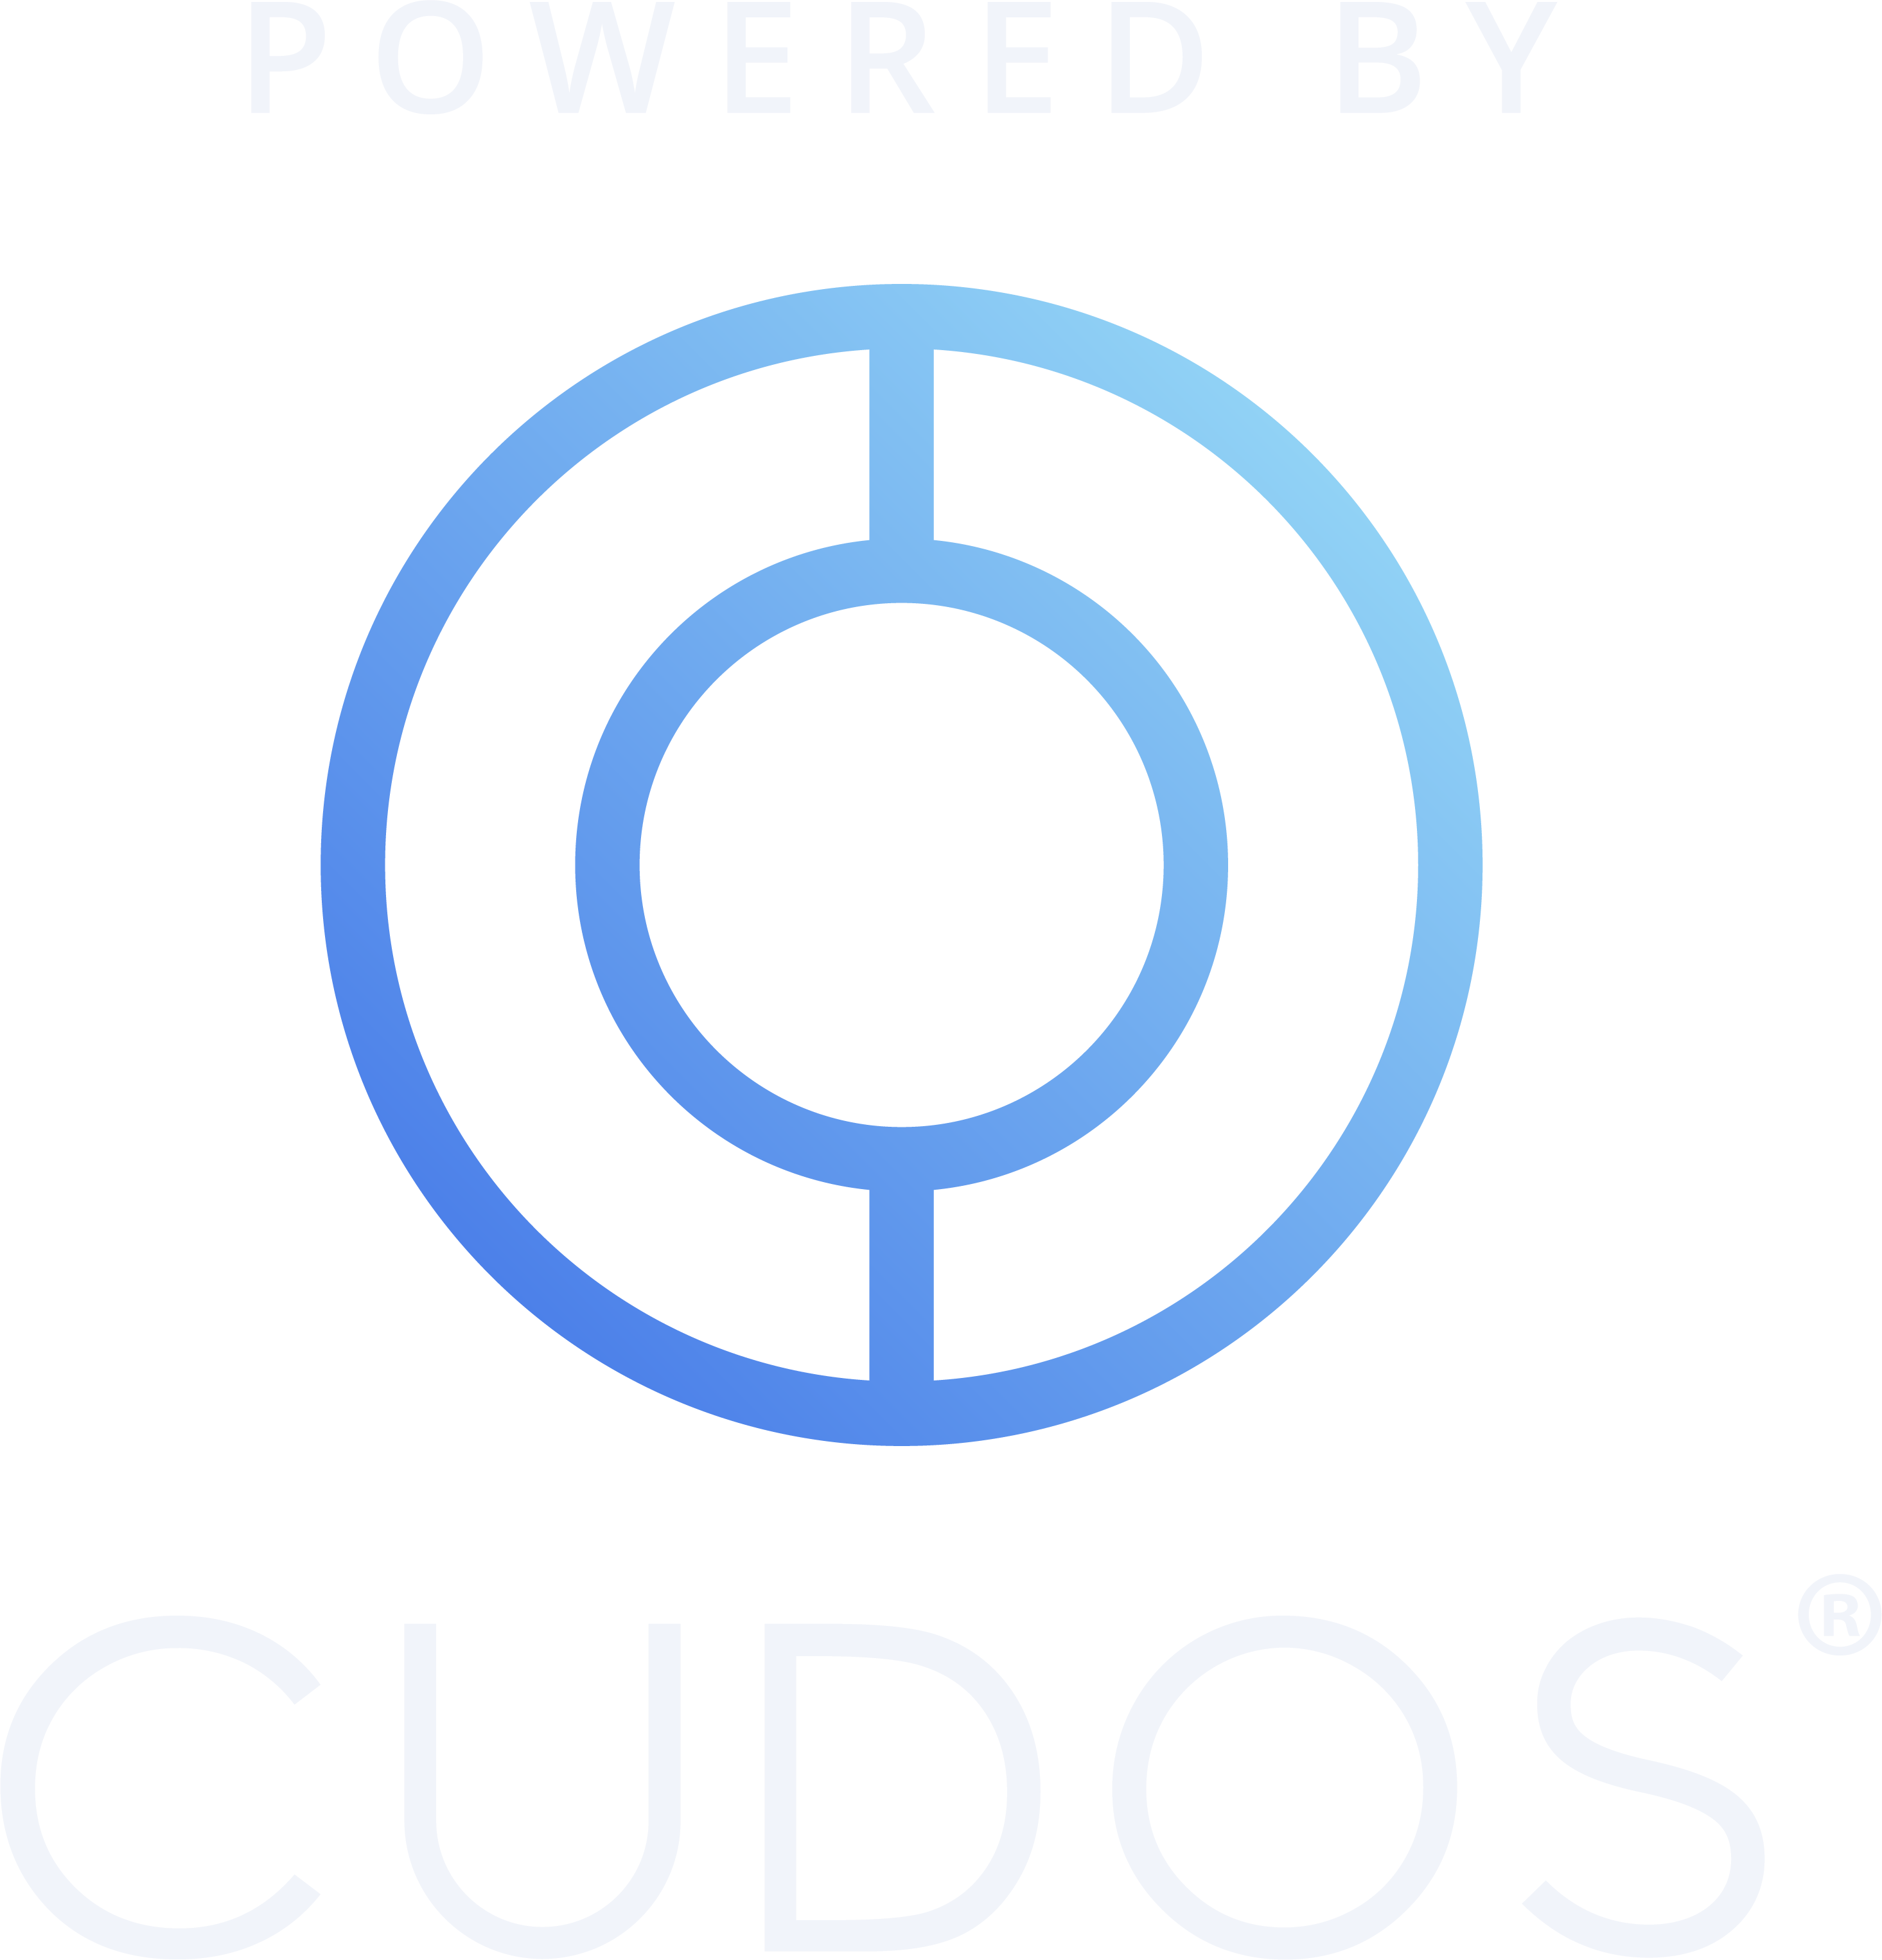 Powered by Cudos W